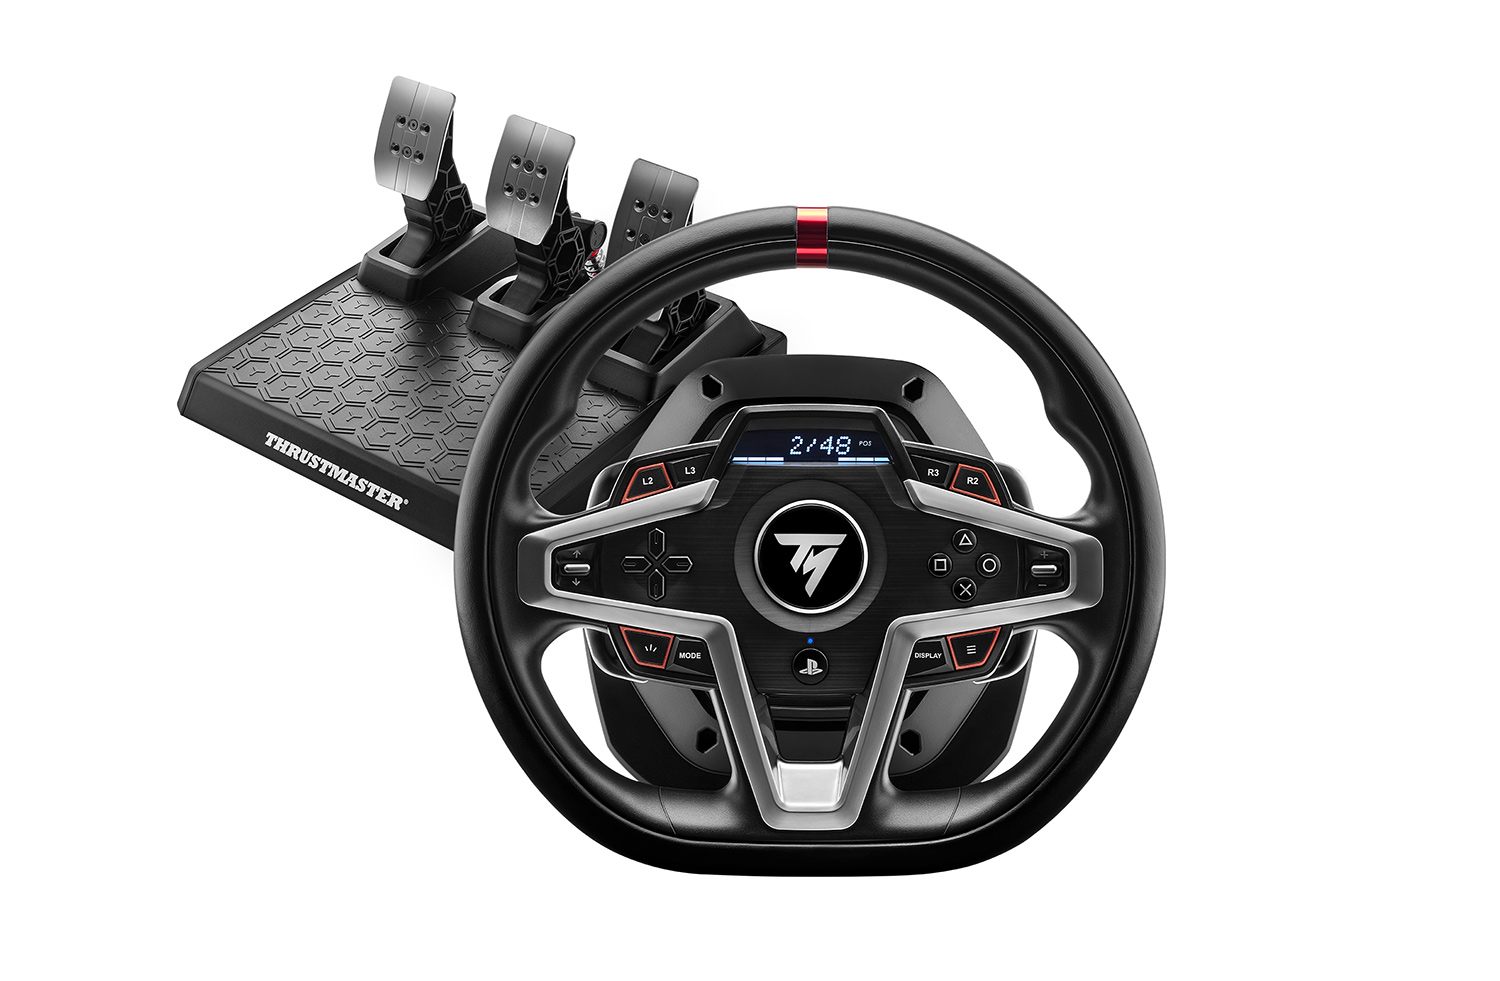 Thrustmaster Gaming Accessories Overview